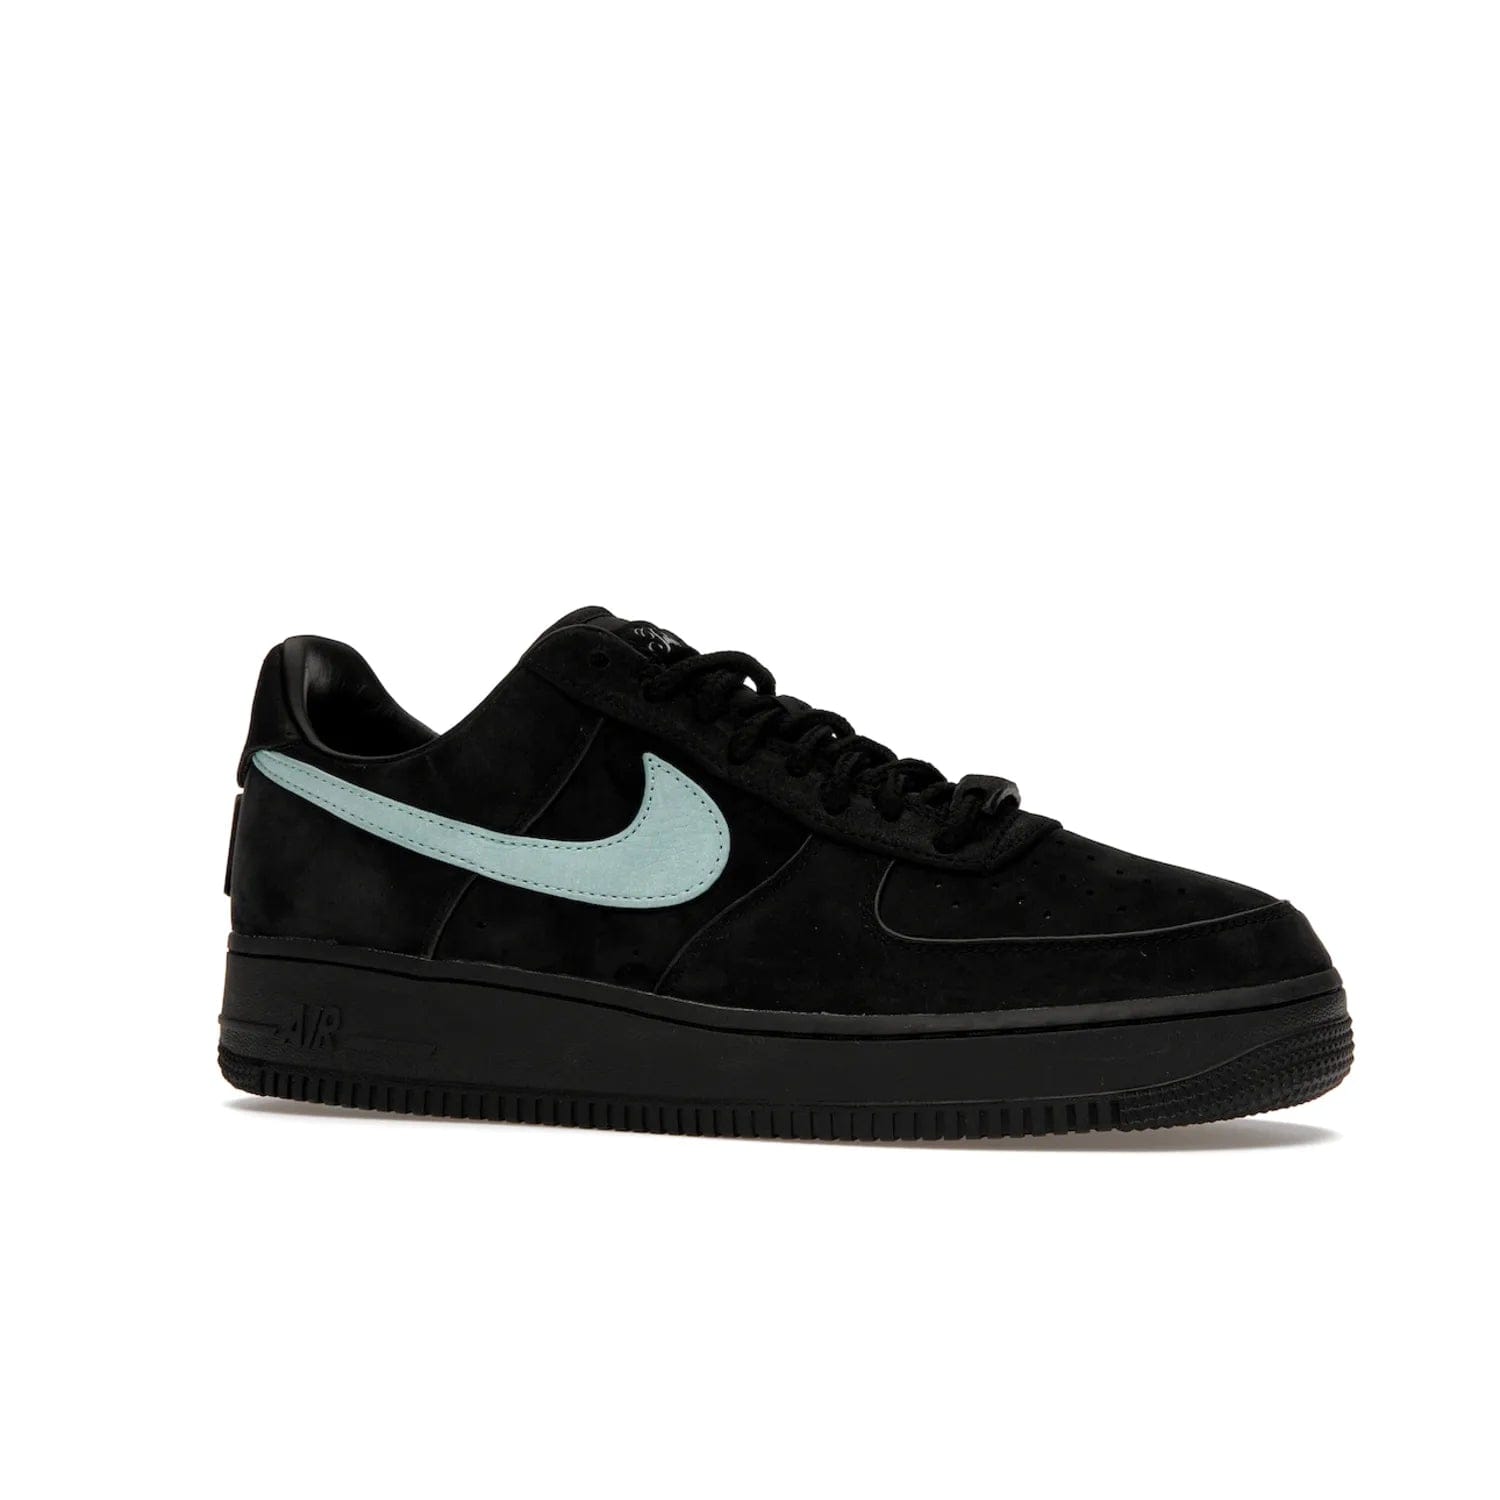 Nike Air Force 1 Low Tiffany & Co. 1837 - Image 3 - Only at www.BallersClubKickz.com - Nike & Tiffany & Co. collaborate on an exclusive sterling silver sneaker, the Air Force 1 Low Tiffany & Co. 1837. Featuring a suede uppr, Tiffany Blue Swoosh and "Tiffany" cursive branding, this pair of AF1s offers an opulent fusion of athleisure and luxury fashion. Release date March 2023.